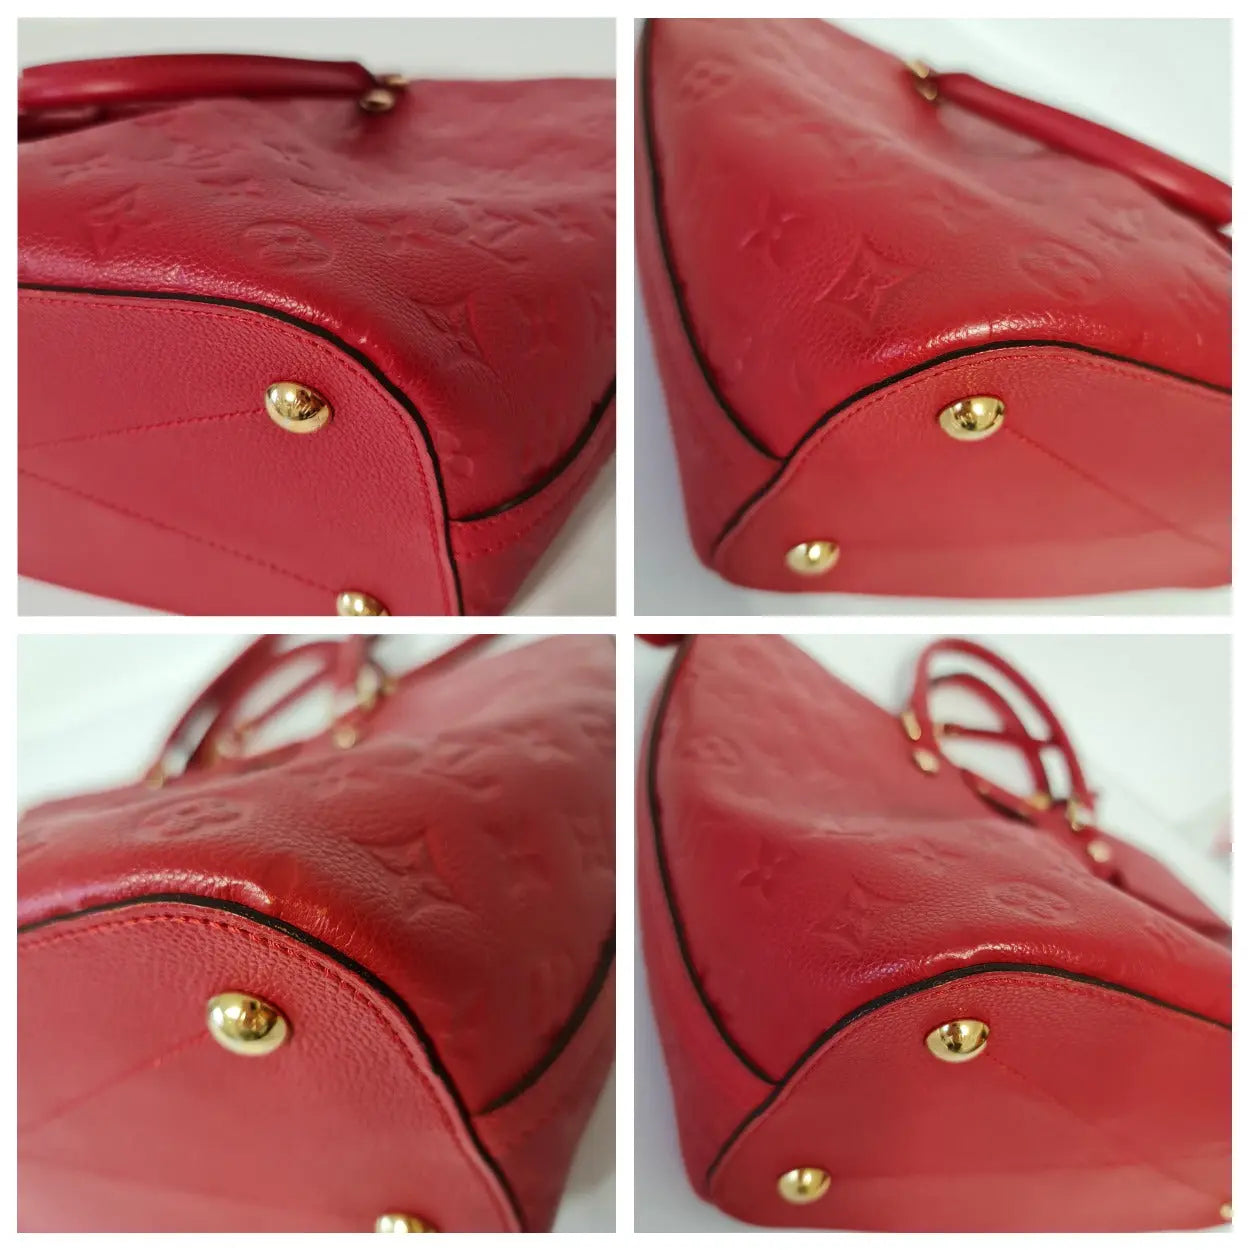 Louis Vuitton, Bags, Surene Mm Mng Cerise In Red Lightly Used